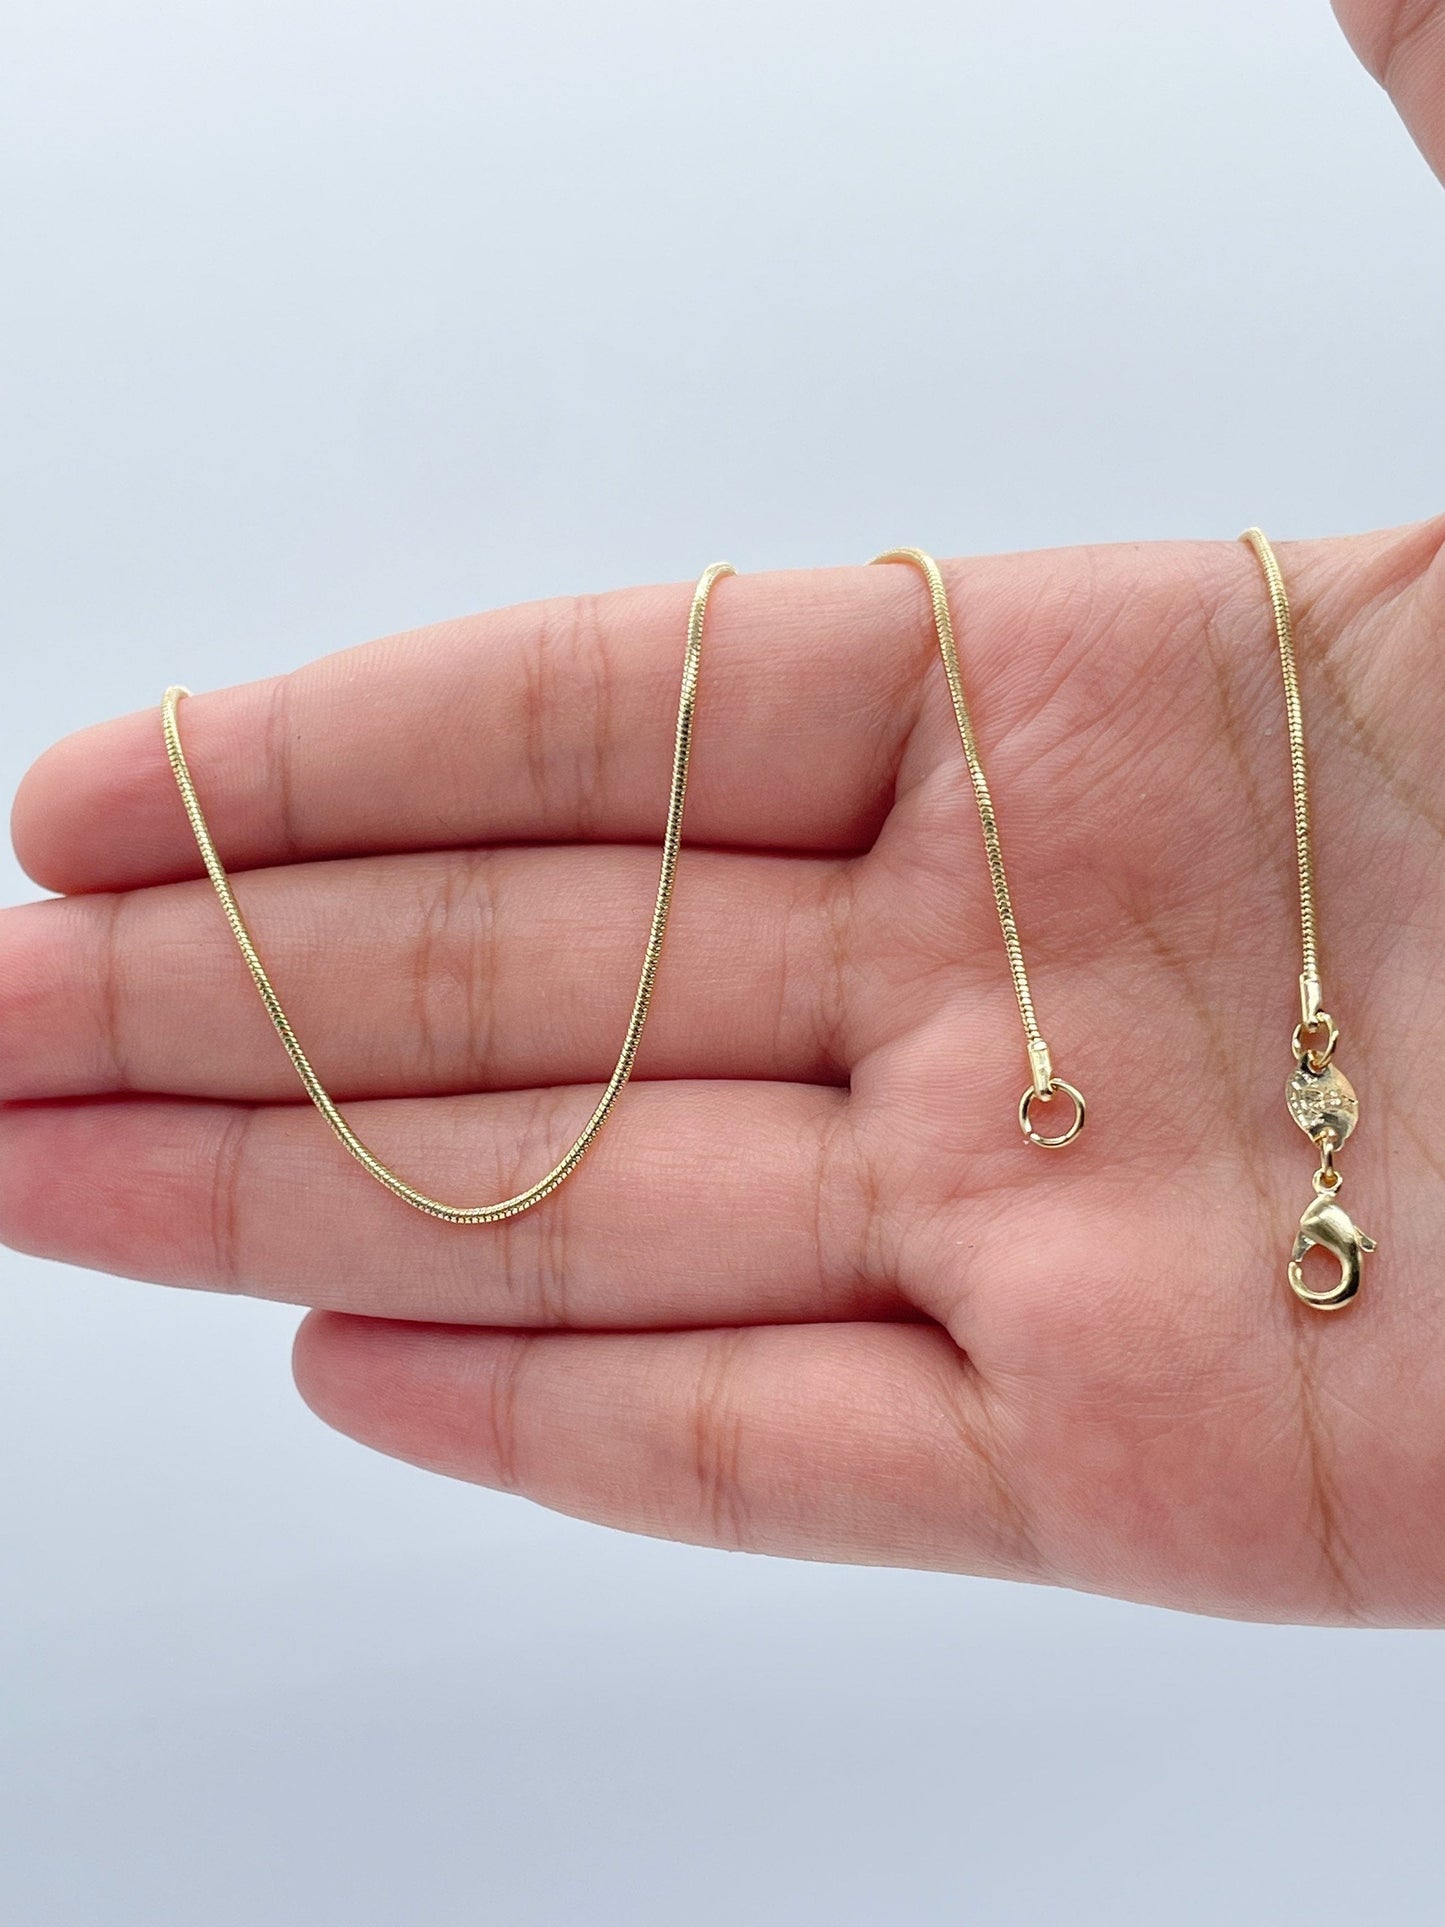 18k Gold Layered 1mm Round Snake Textured Chain Available In Sizes 16”, 18”, 20”,